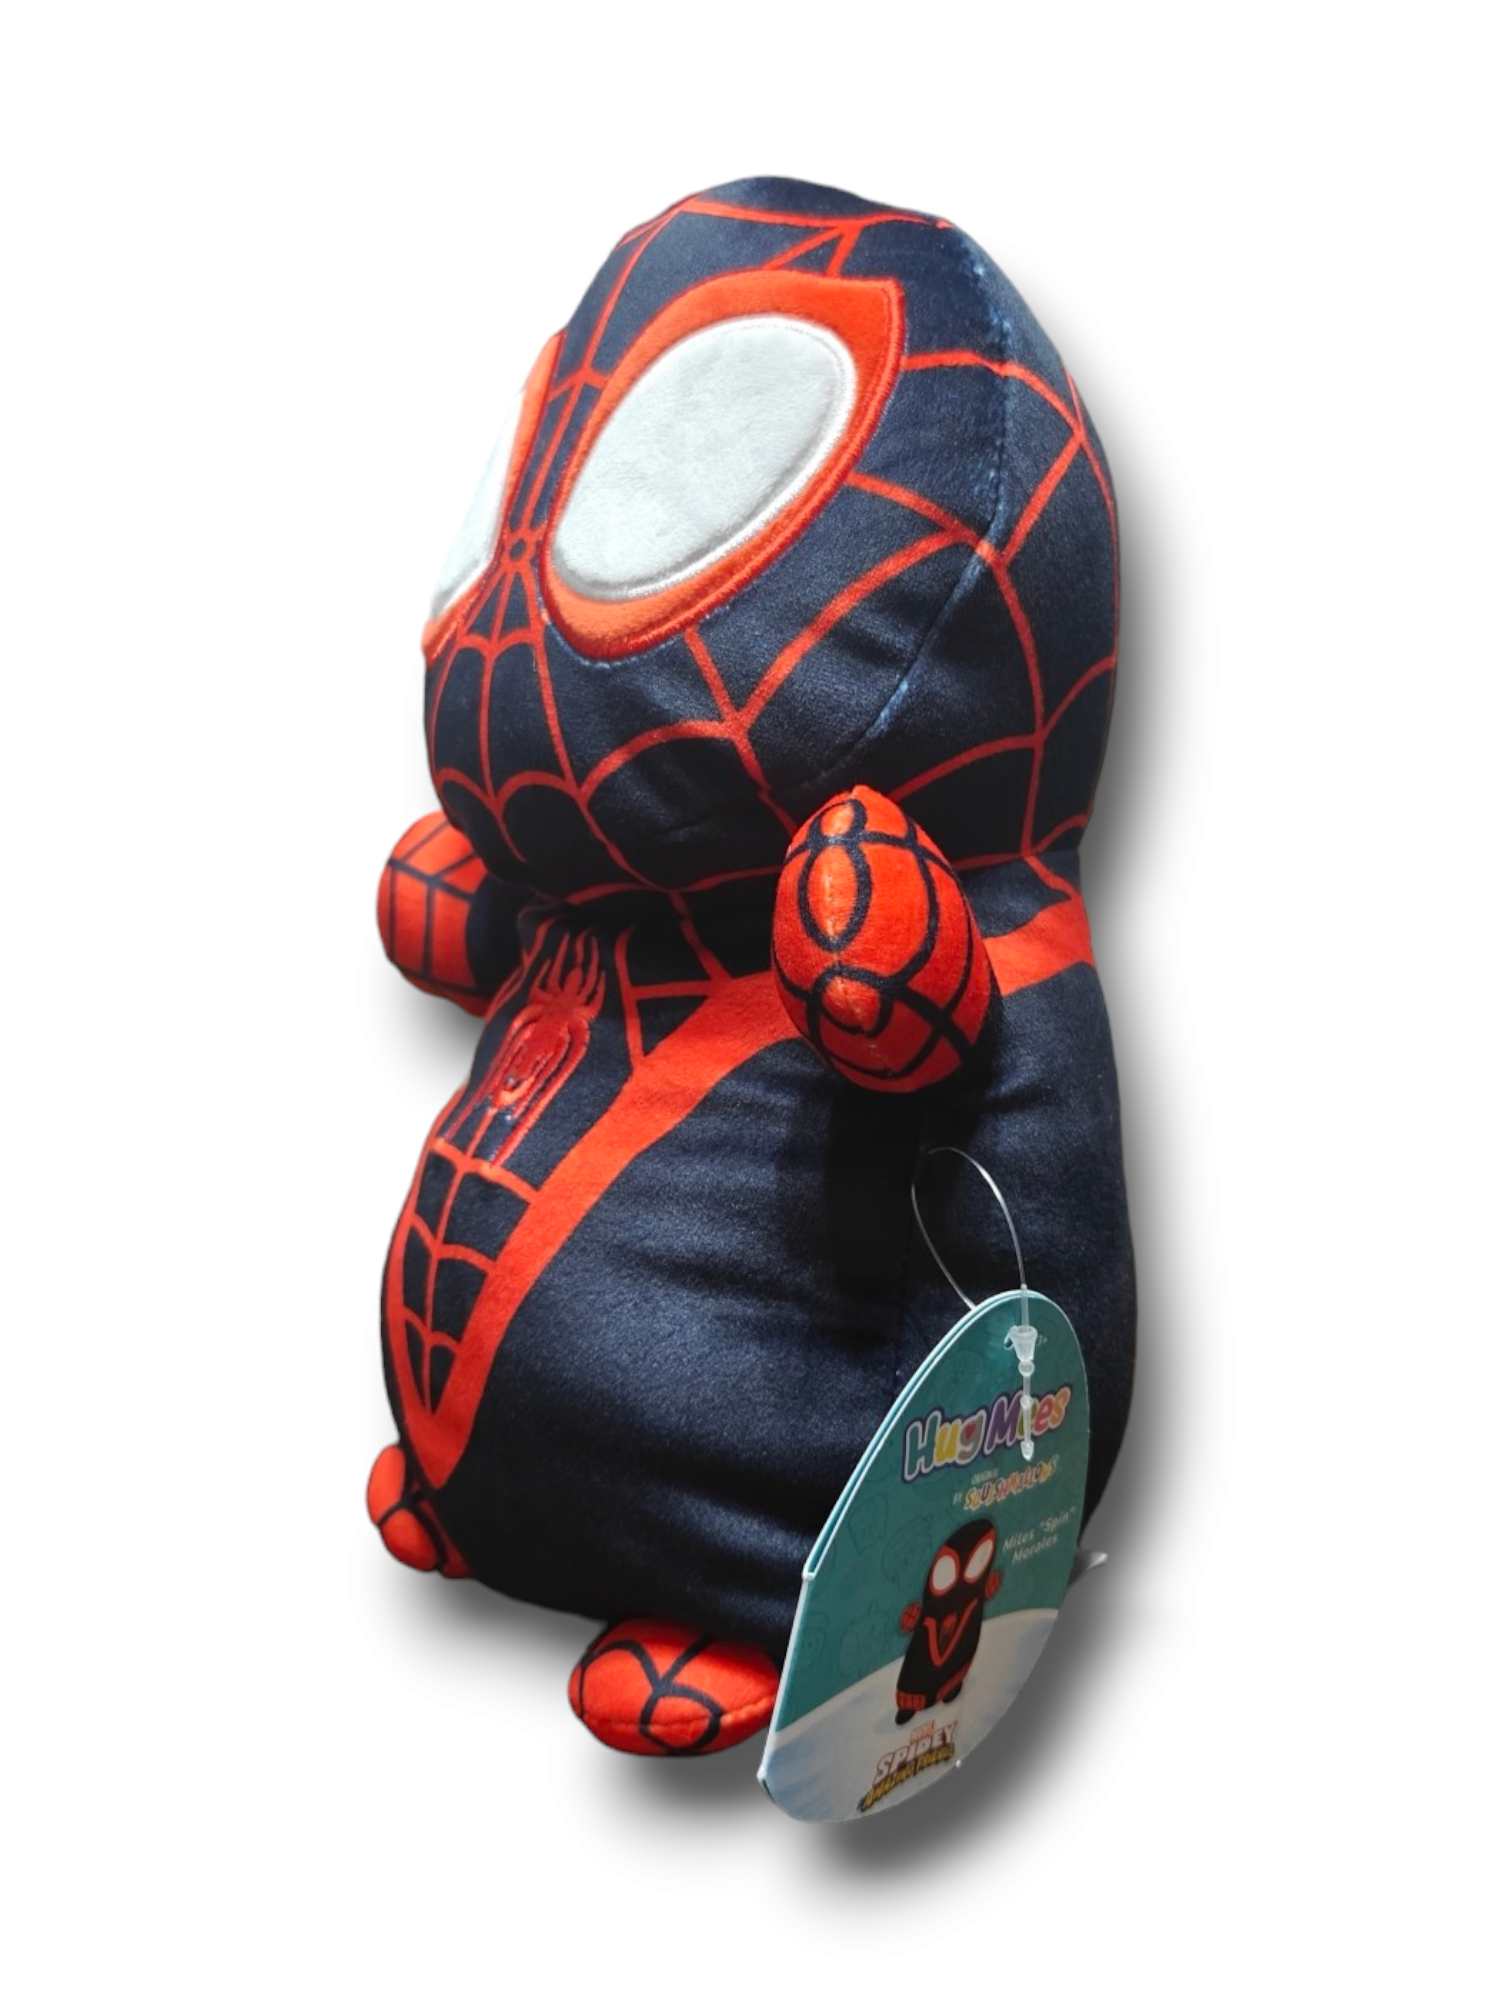 Marvel's Miles Morales 10" Spiderman Squishmallow HugMee - Collectible, Ultra-Soft Plush for All Ages - Ricky's Garage